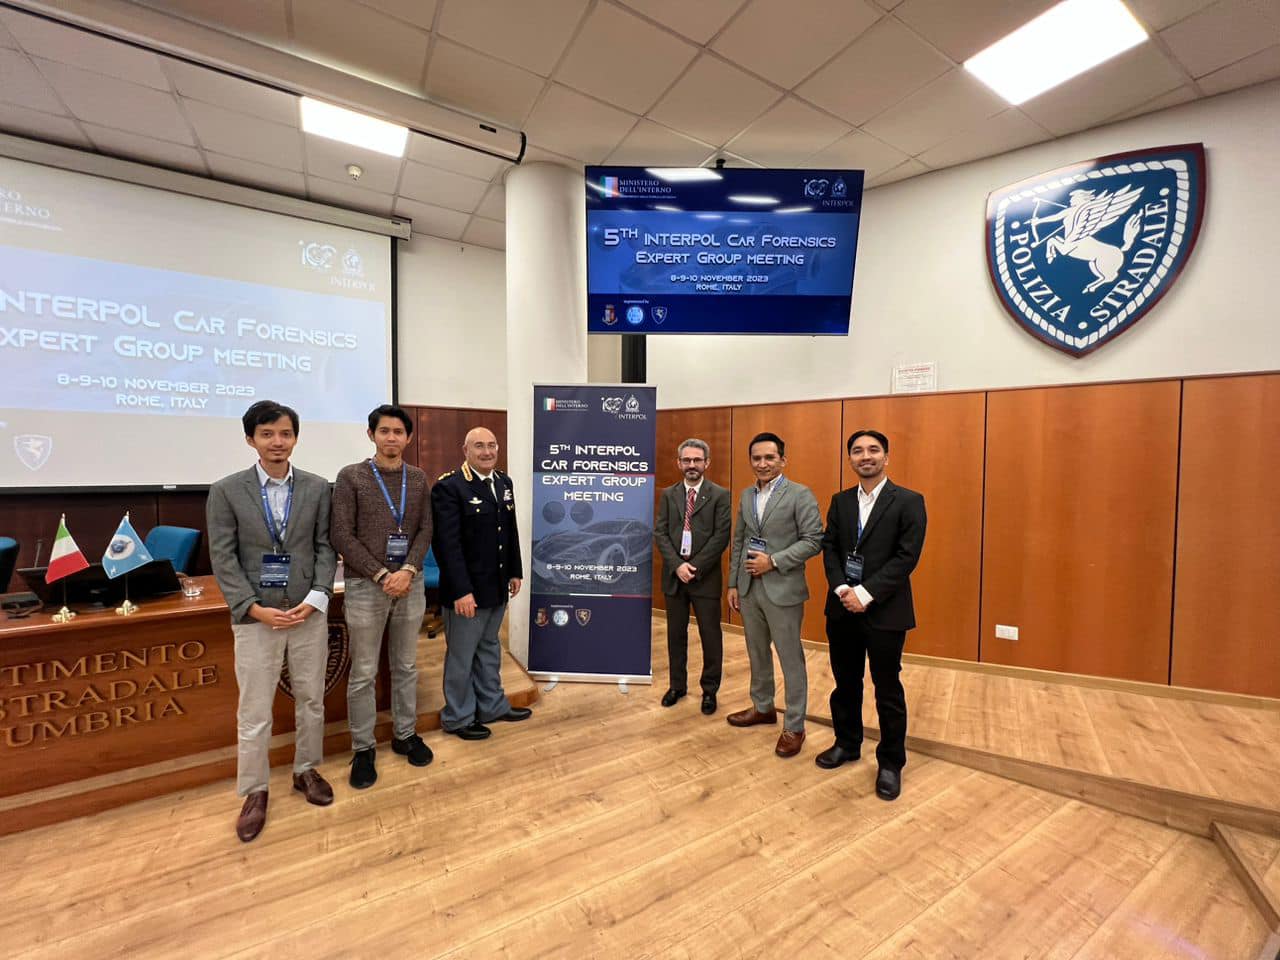 FTKEE researchers participate in "INTERPOL Car Forensic Expert Group Meeting" in Italy